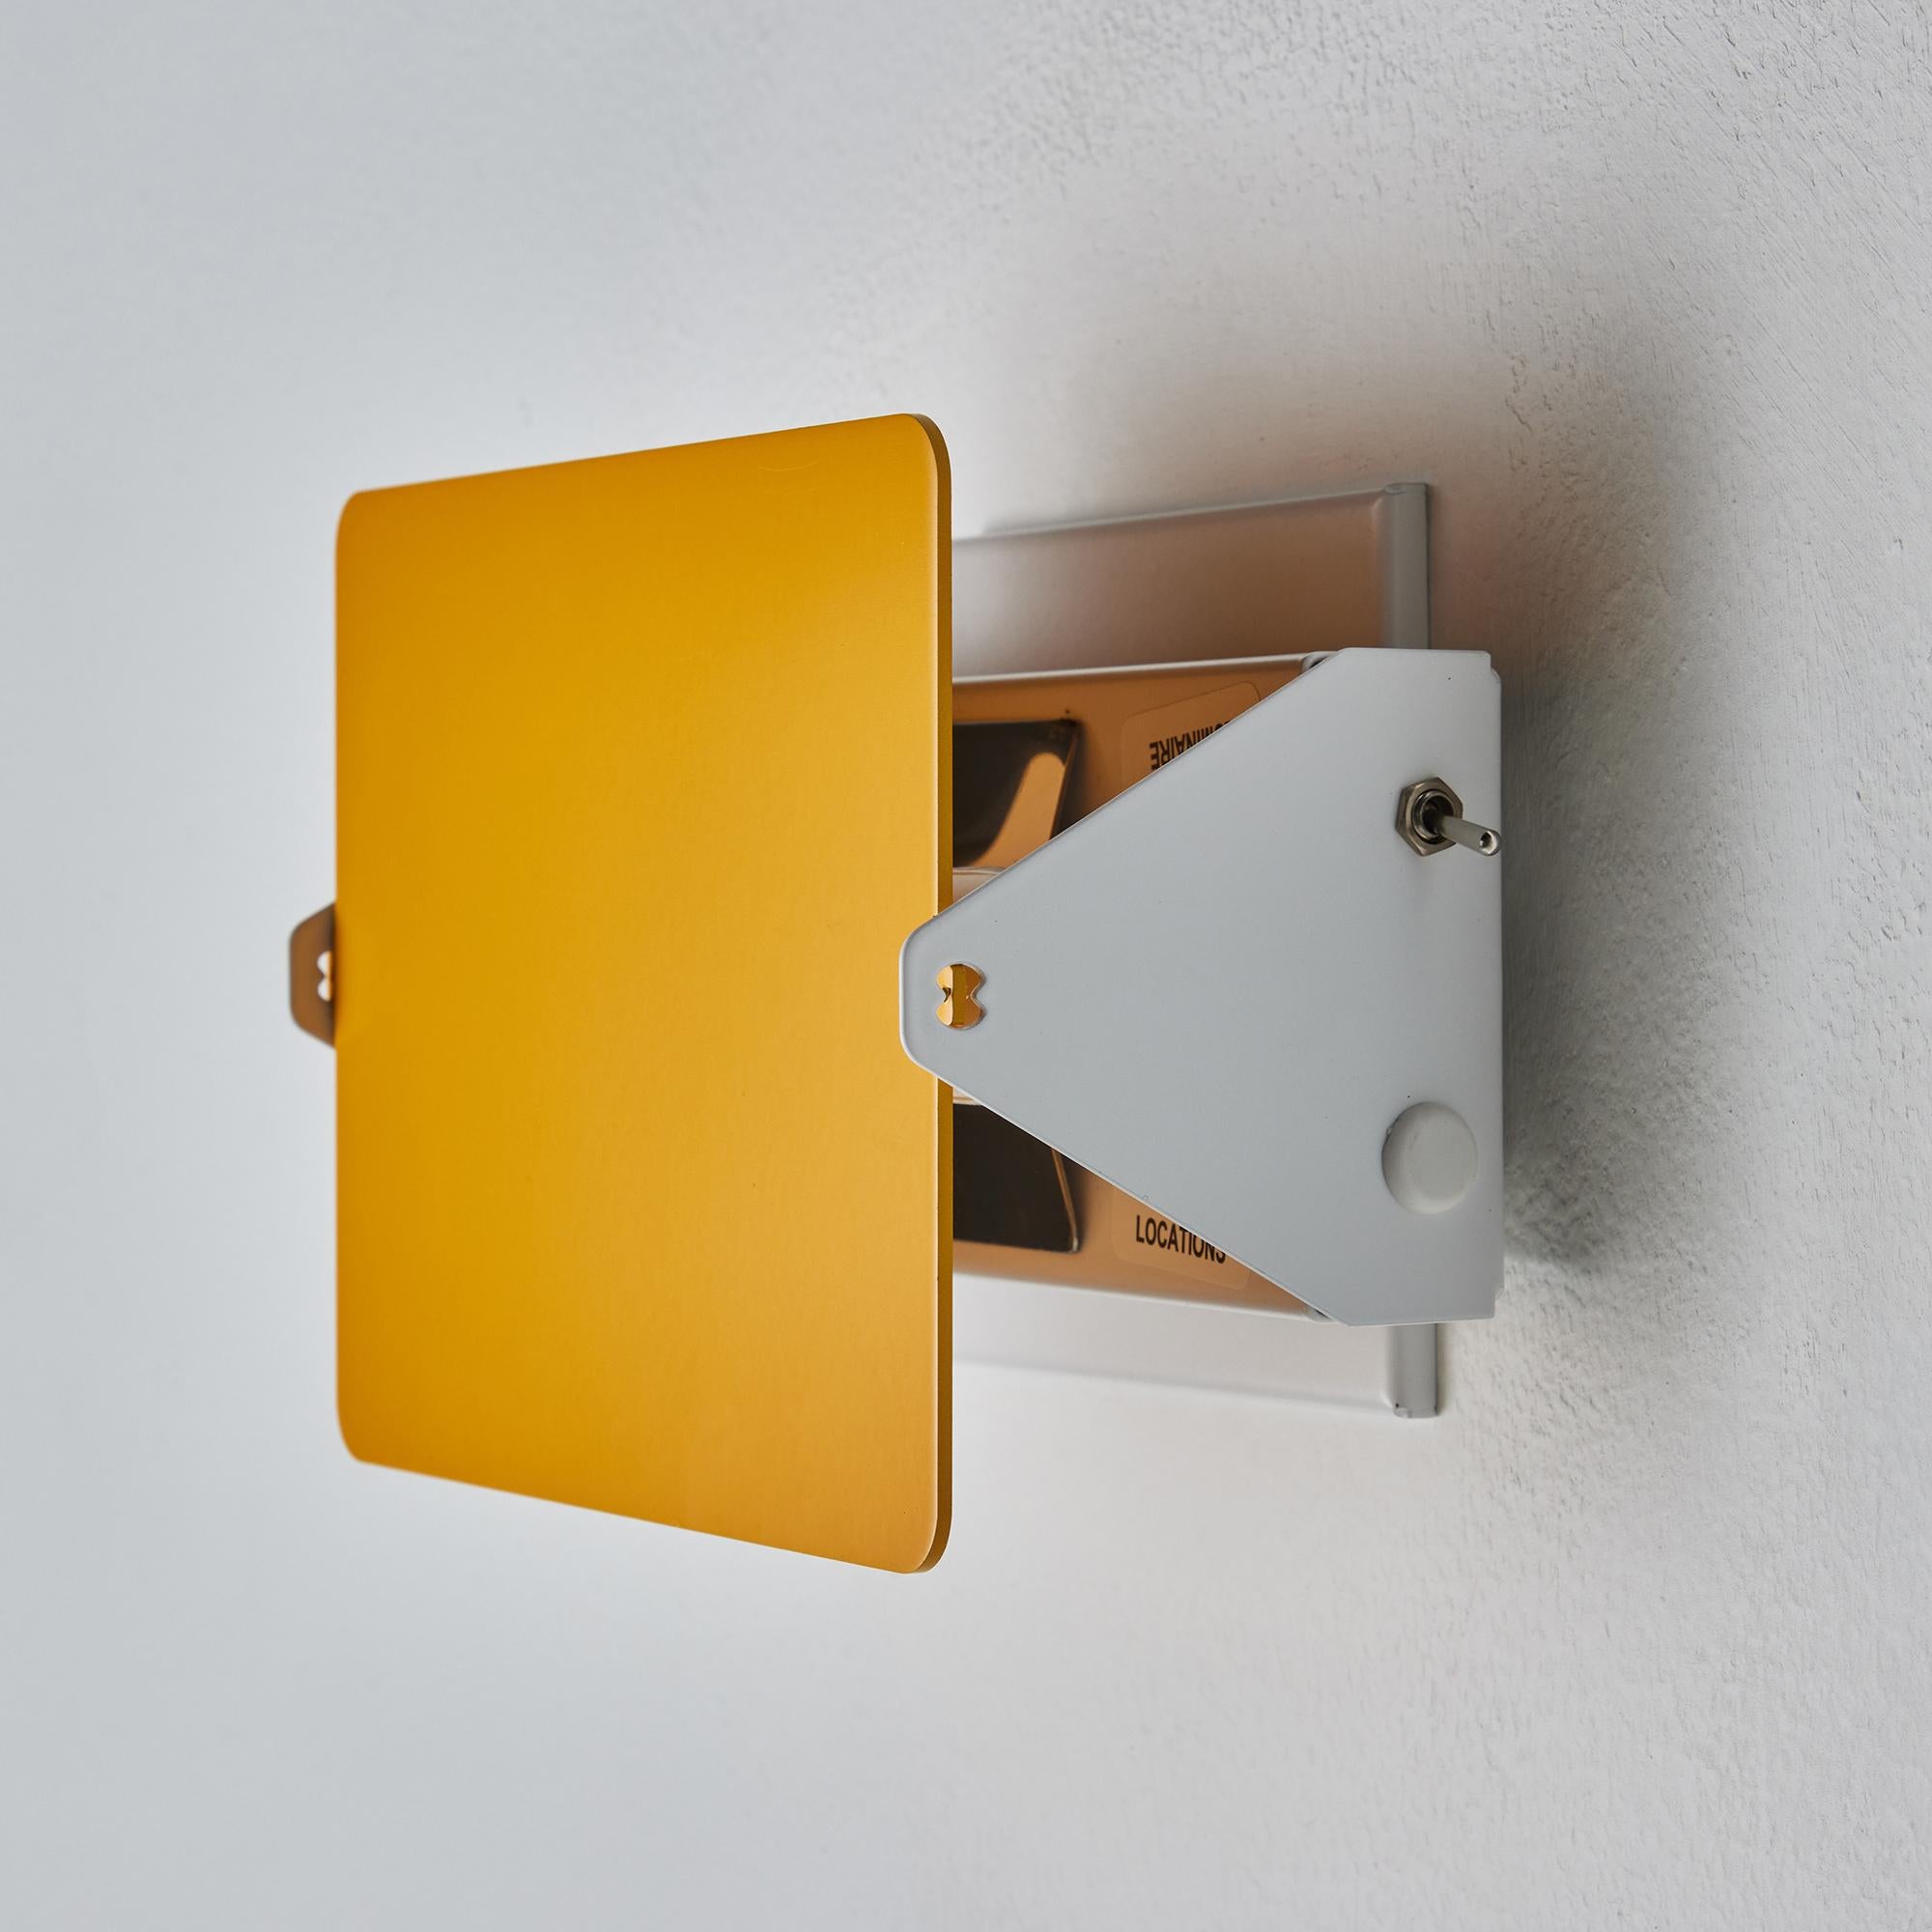 Anodized Charlotte Perriand 'Applique à Volet Pivotant' Wall Light in Yellow for Nemo For Sale